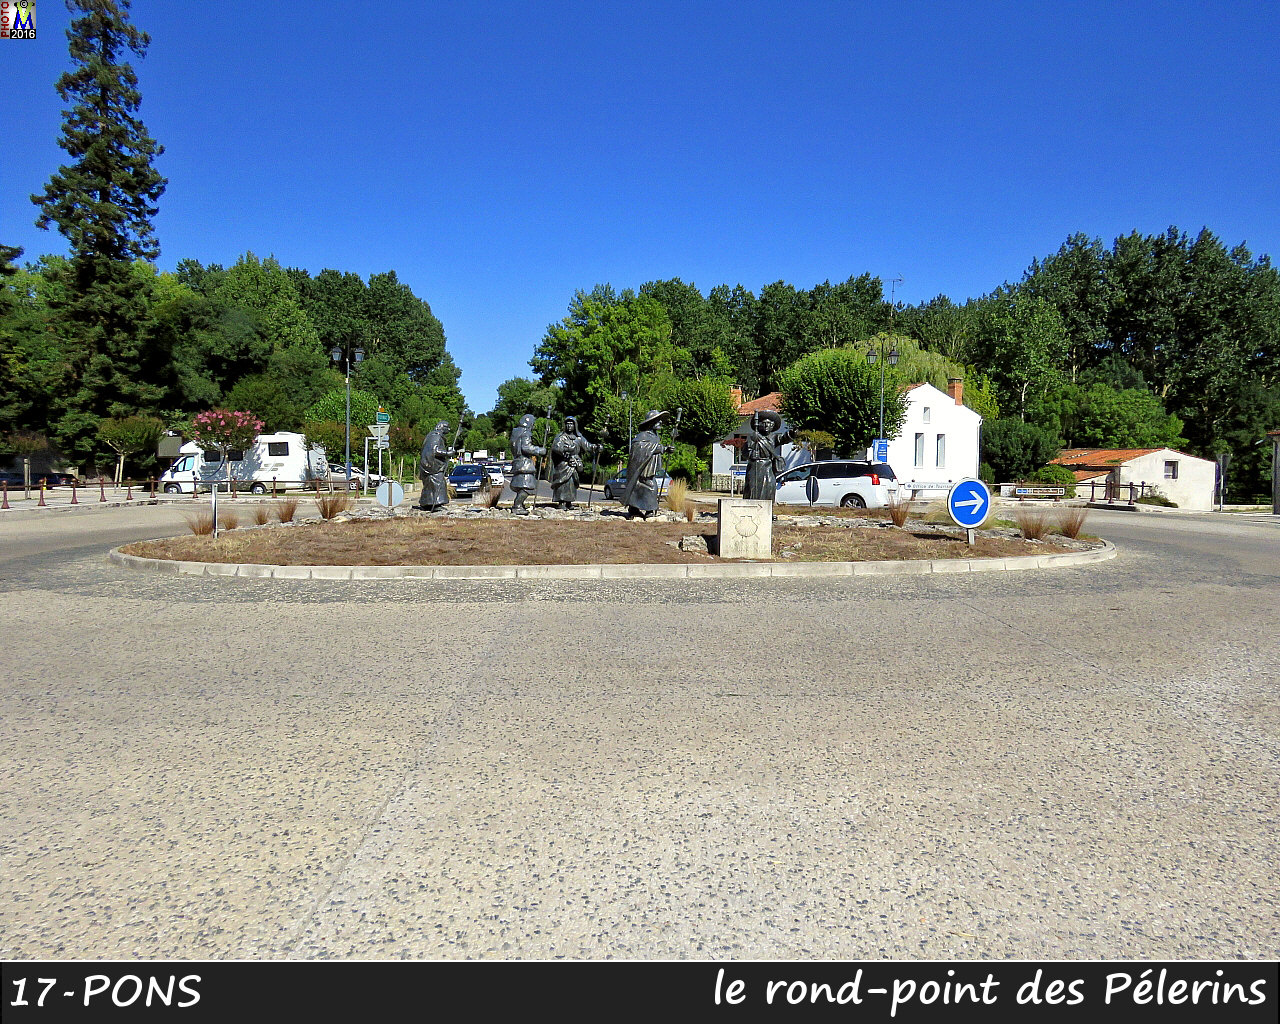 17PONS_Rond-point_1000.jpg